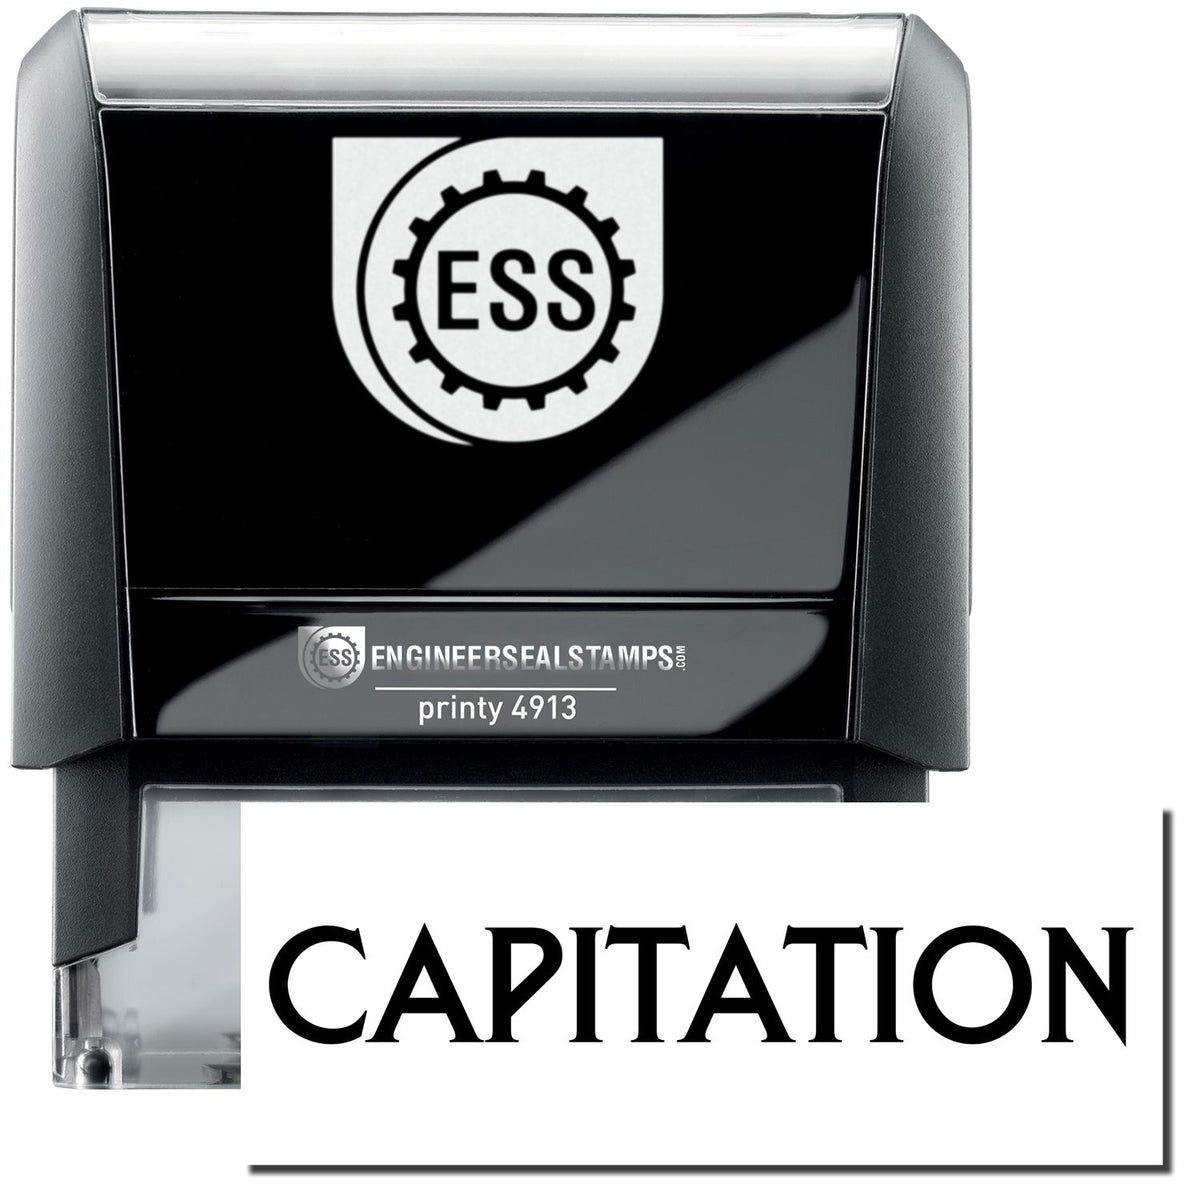 A self-inking stamp with a stamped image showing how the text &quot;CAPITATION&quot; in a large bold font is displayed by it.